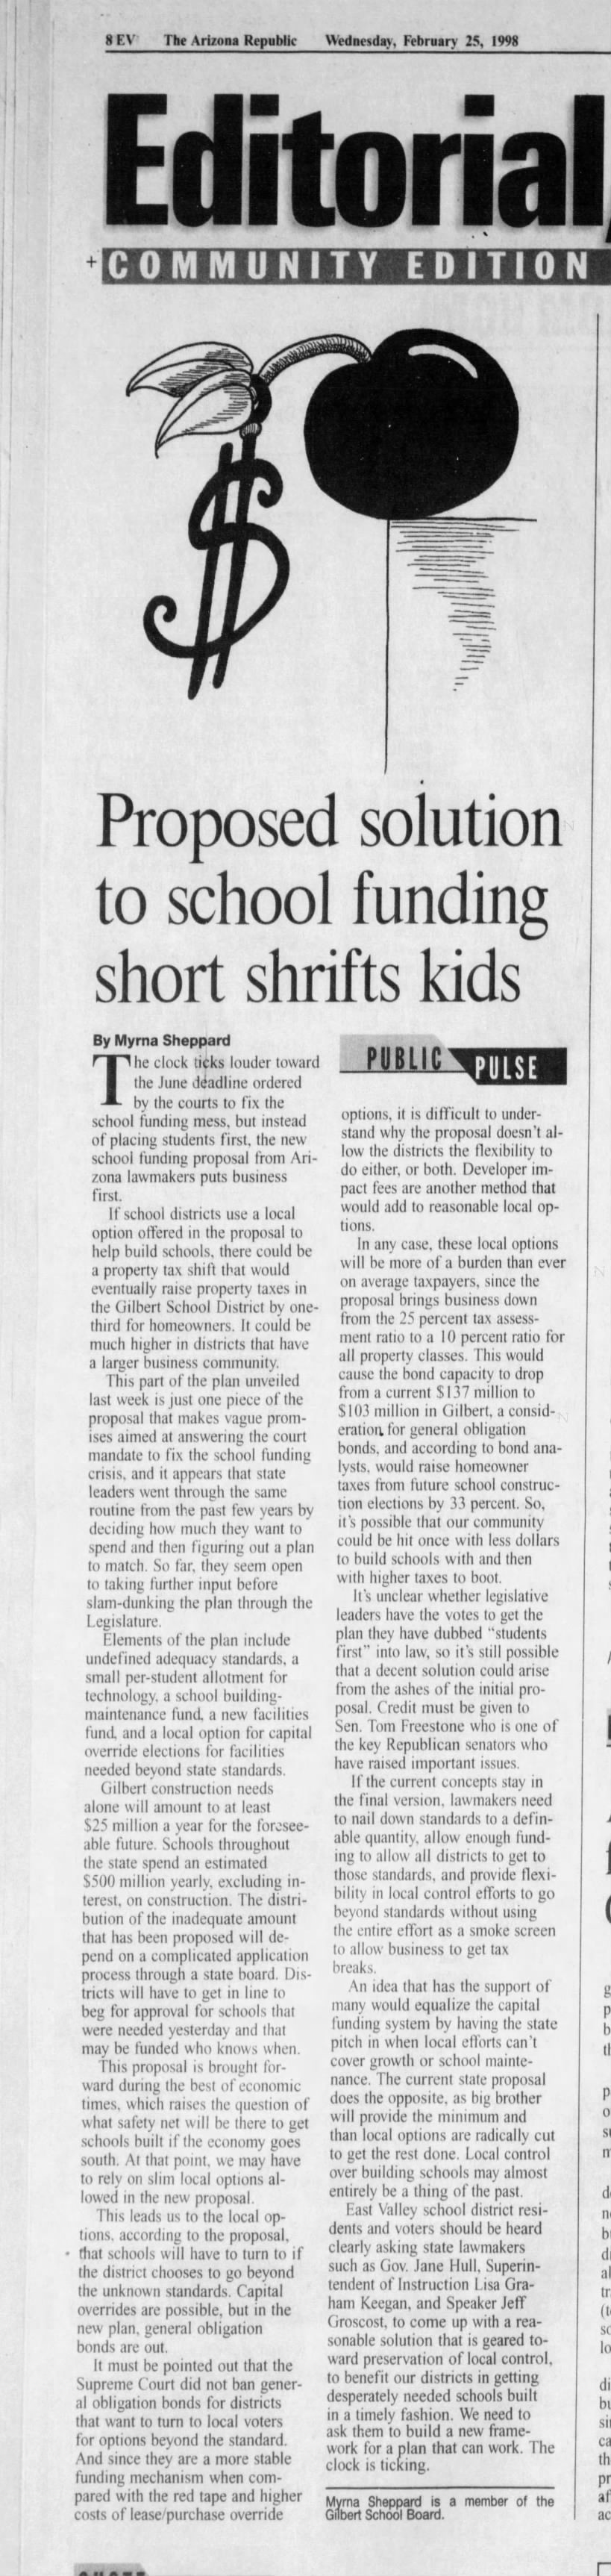 Students FIRST editorial 2/25/98